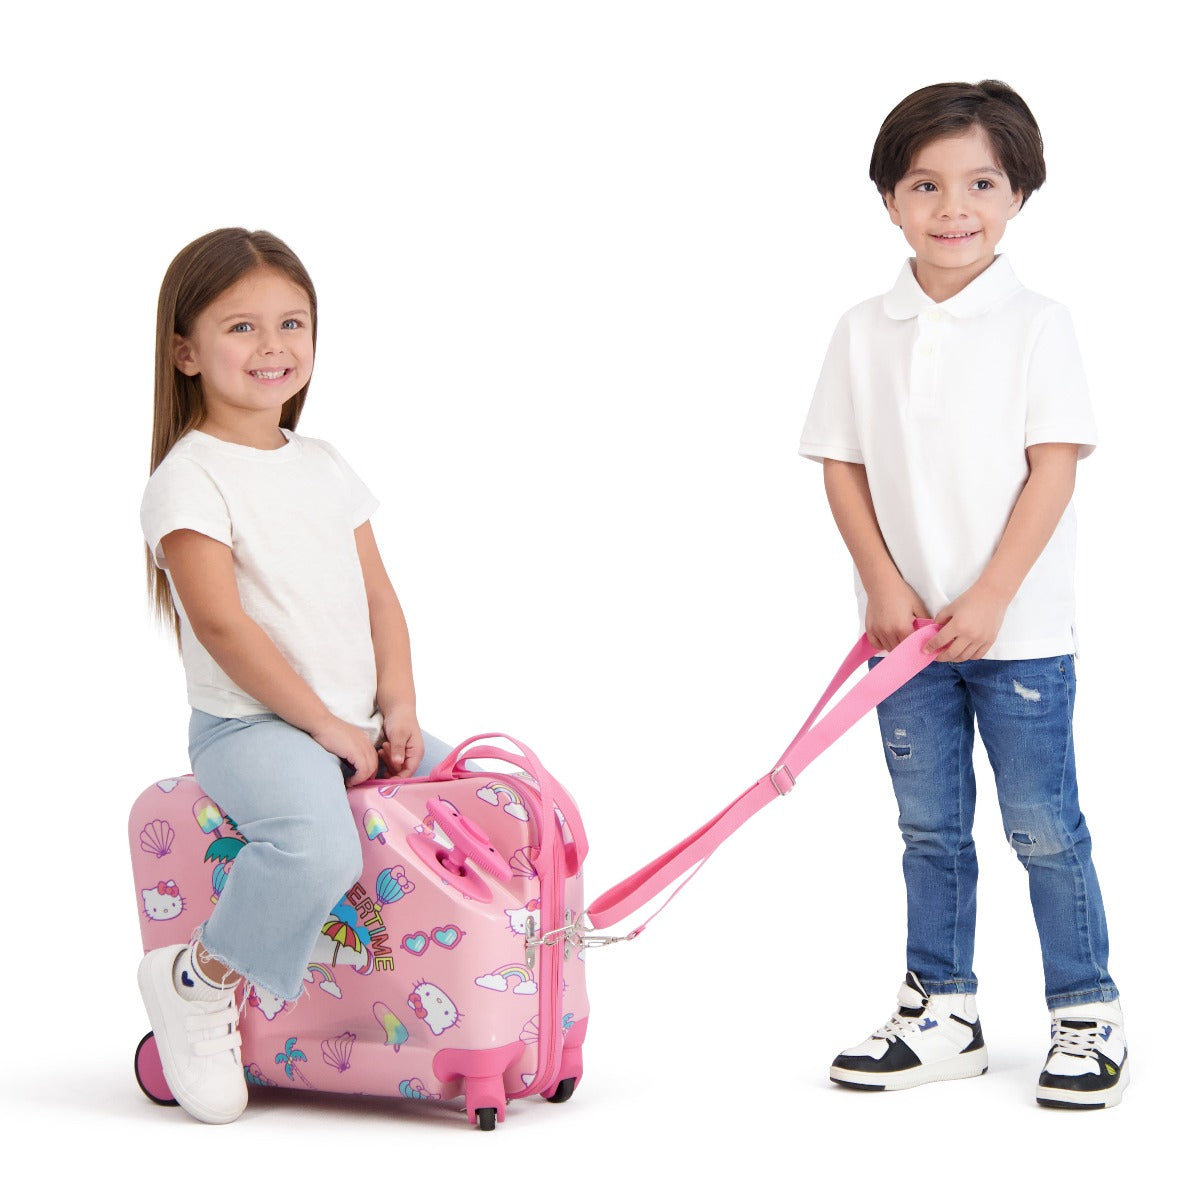 Pink Hello Kitty Summertime Ride-on 14.5" carry-on hardside spinner suitcase for kids